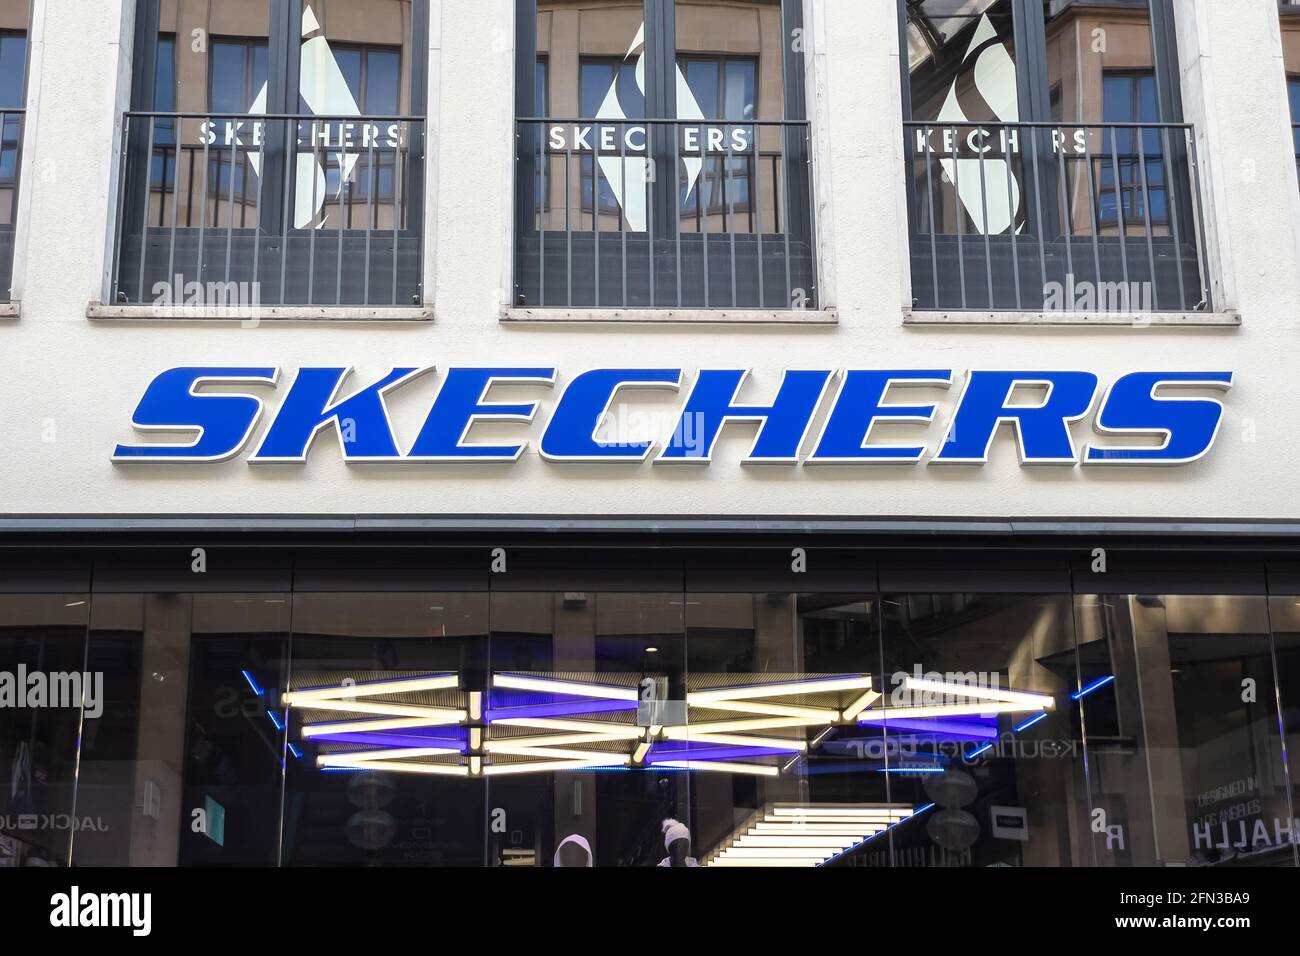 Skechers shoe store sign in Munich's town center Stock Photo - Alamy